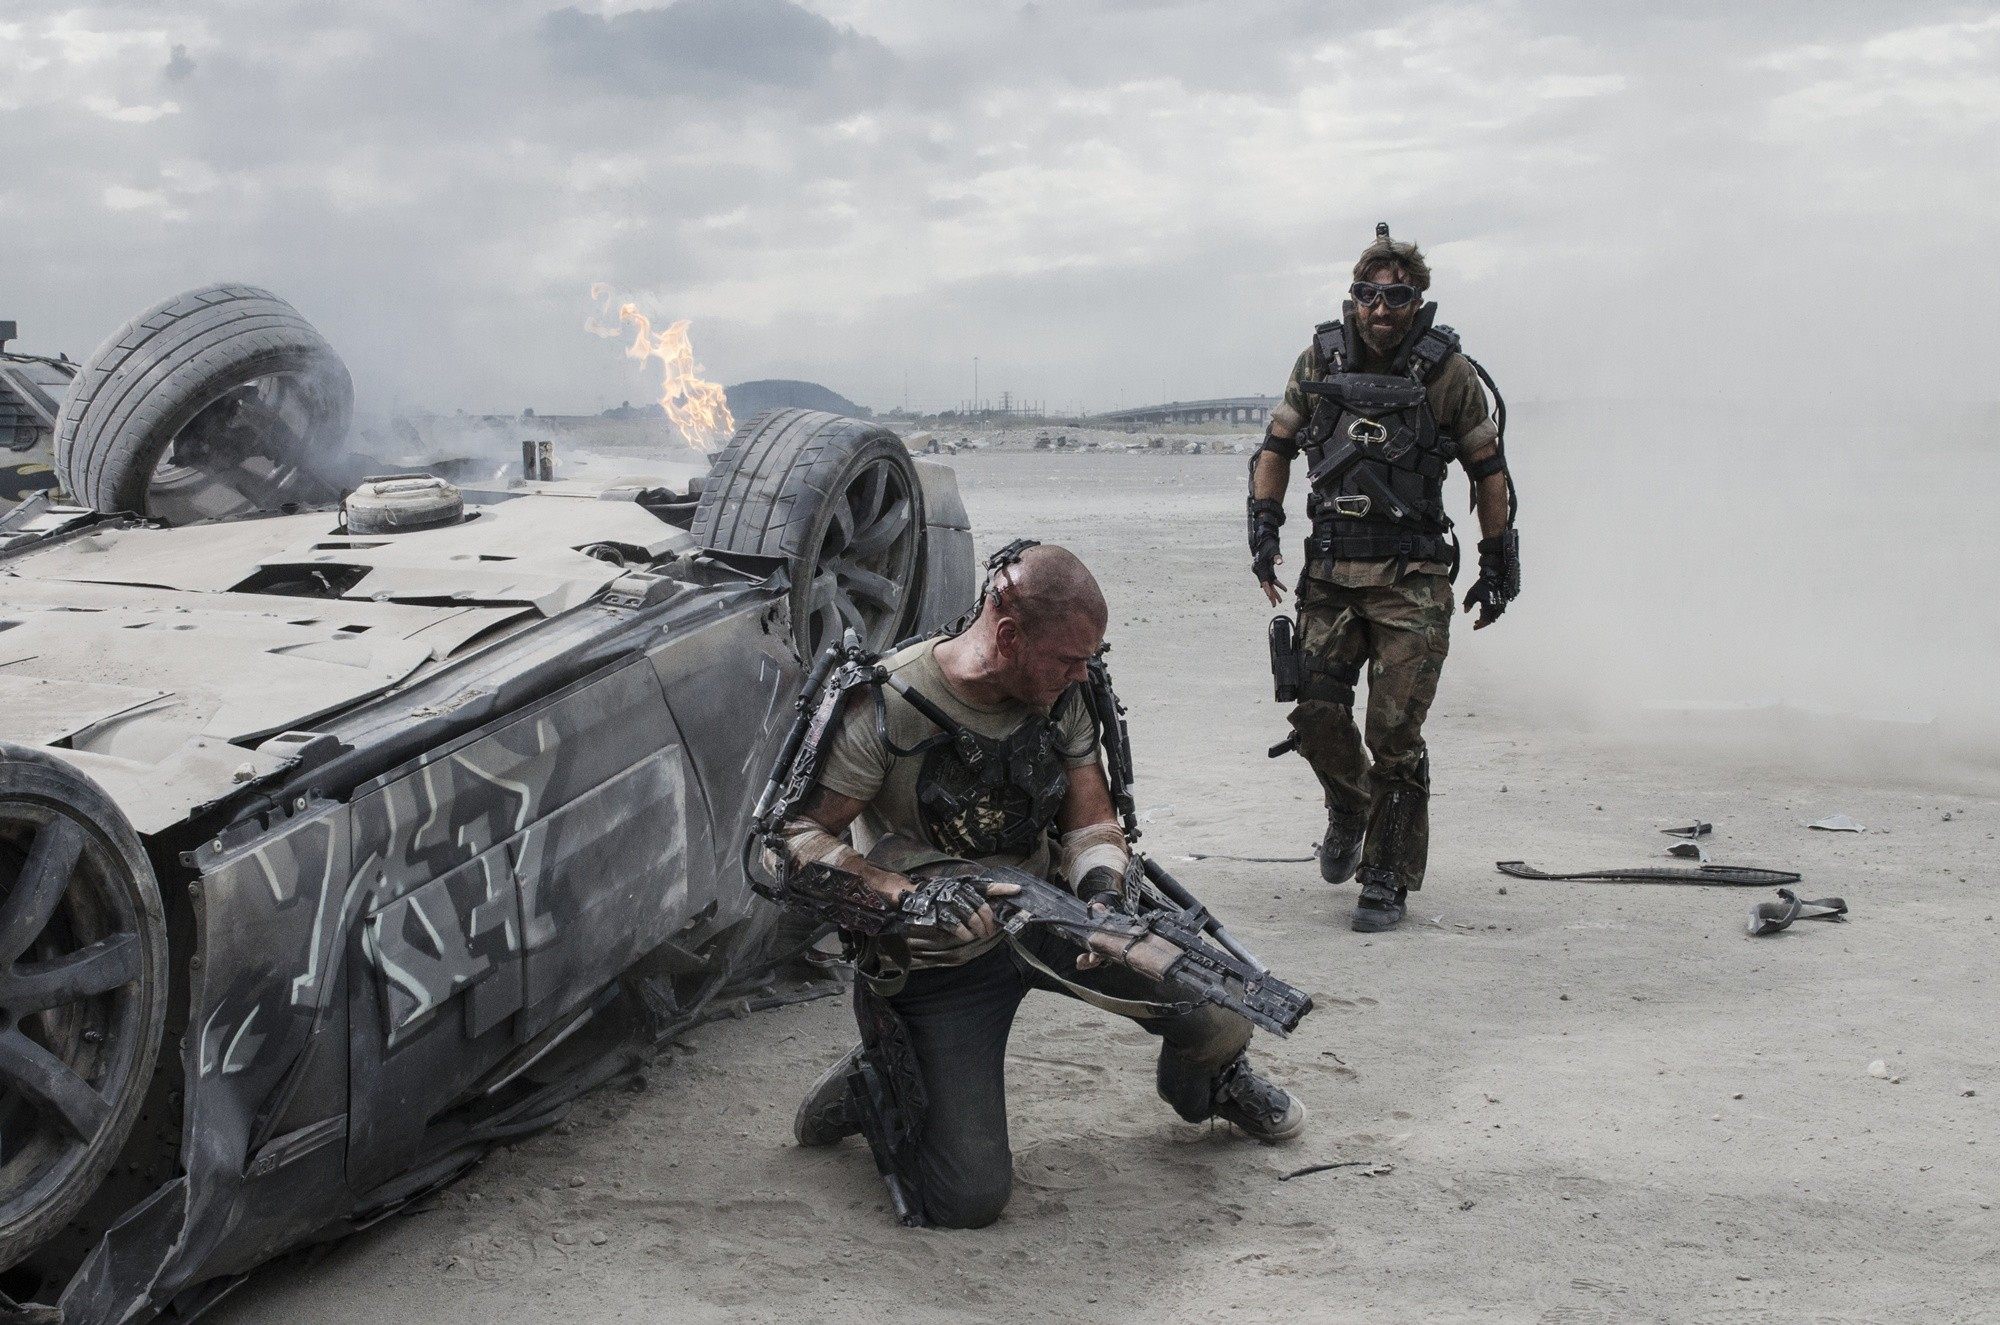 Matt Damon stars as Max and Wagner Moura stars as Spider in TriStar Pictures' Elysium (2013)